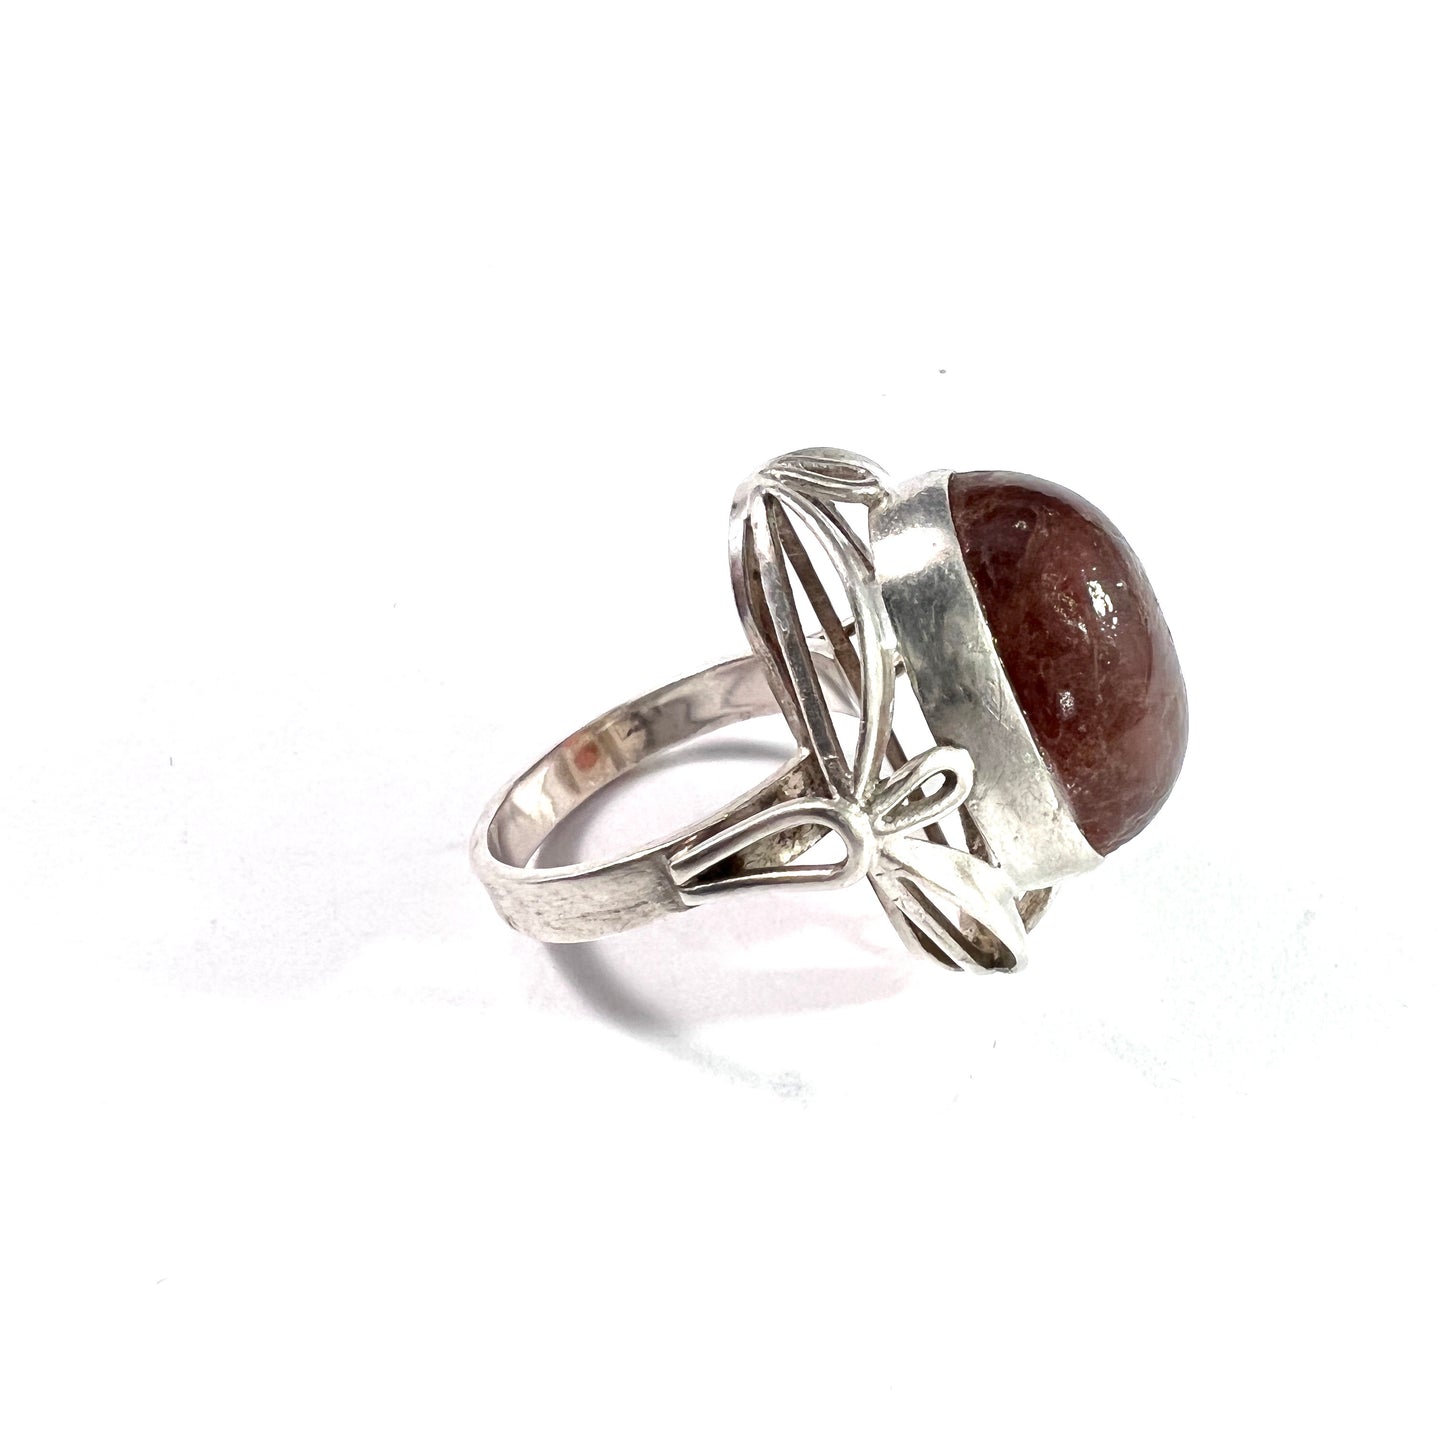 Poland 1960-70s. Vintage Solid Silver Baltic Amber Ring. Maker's Mark.